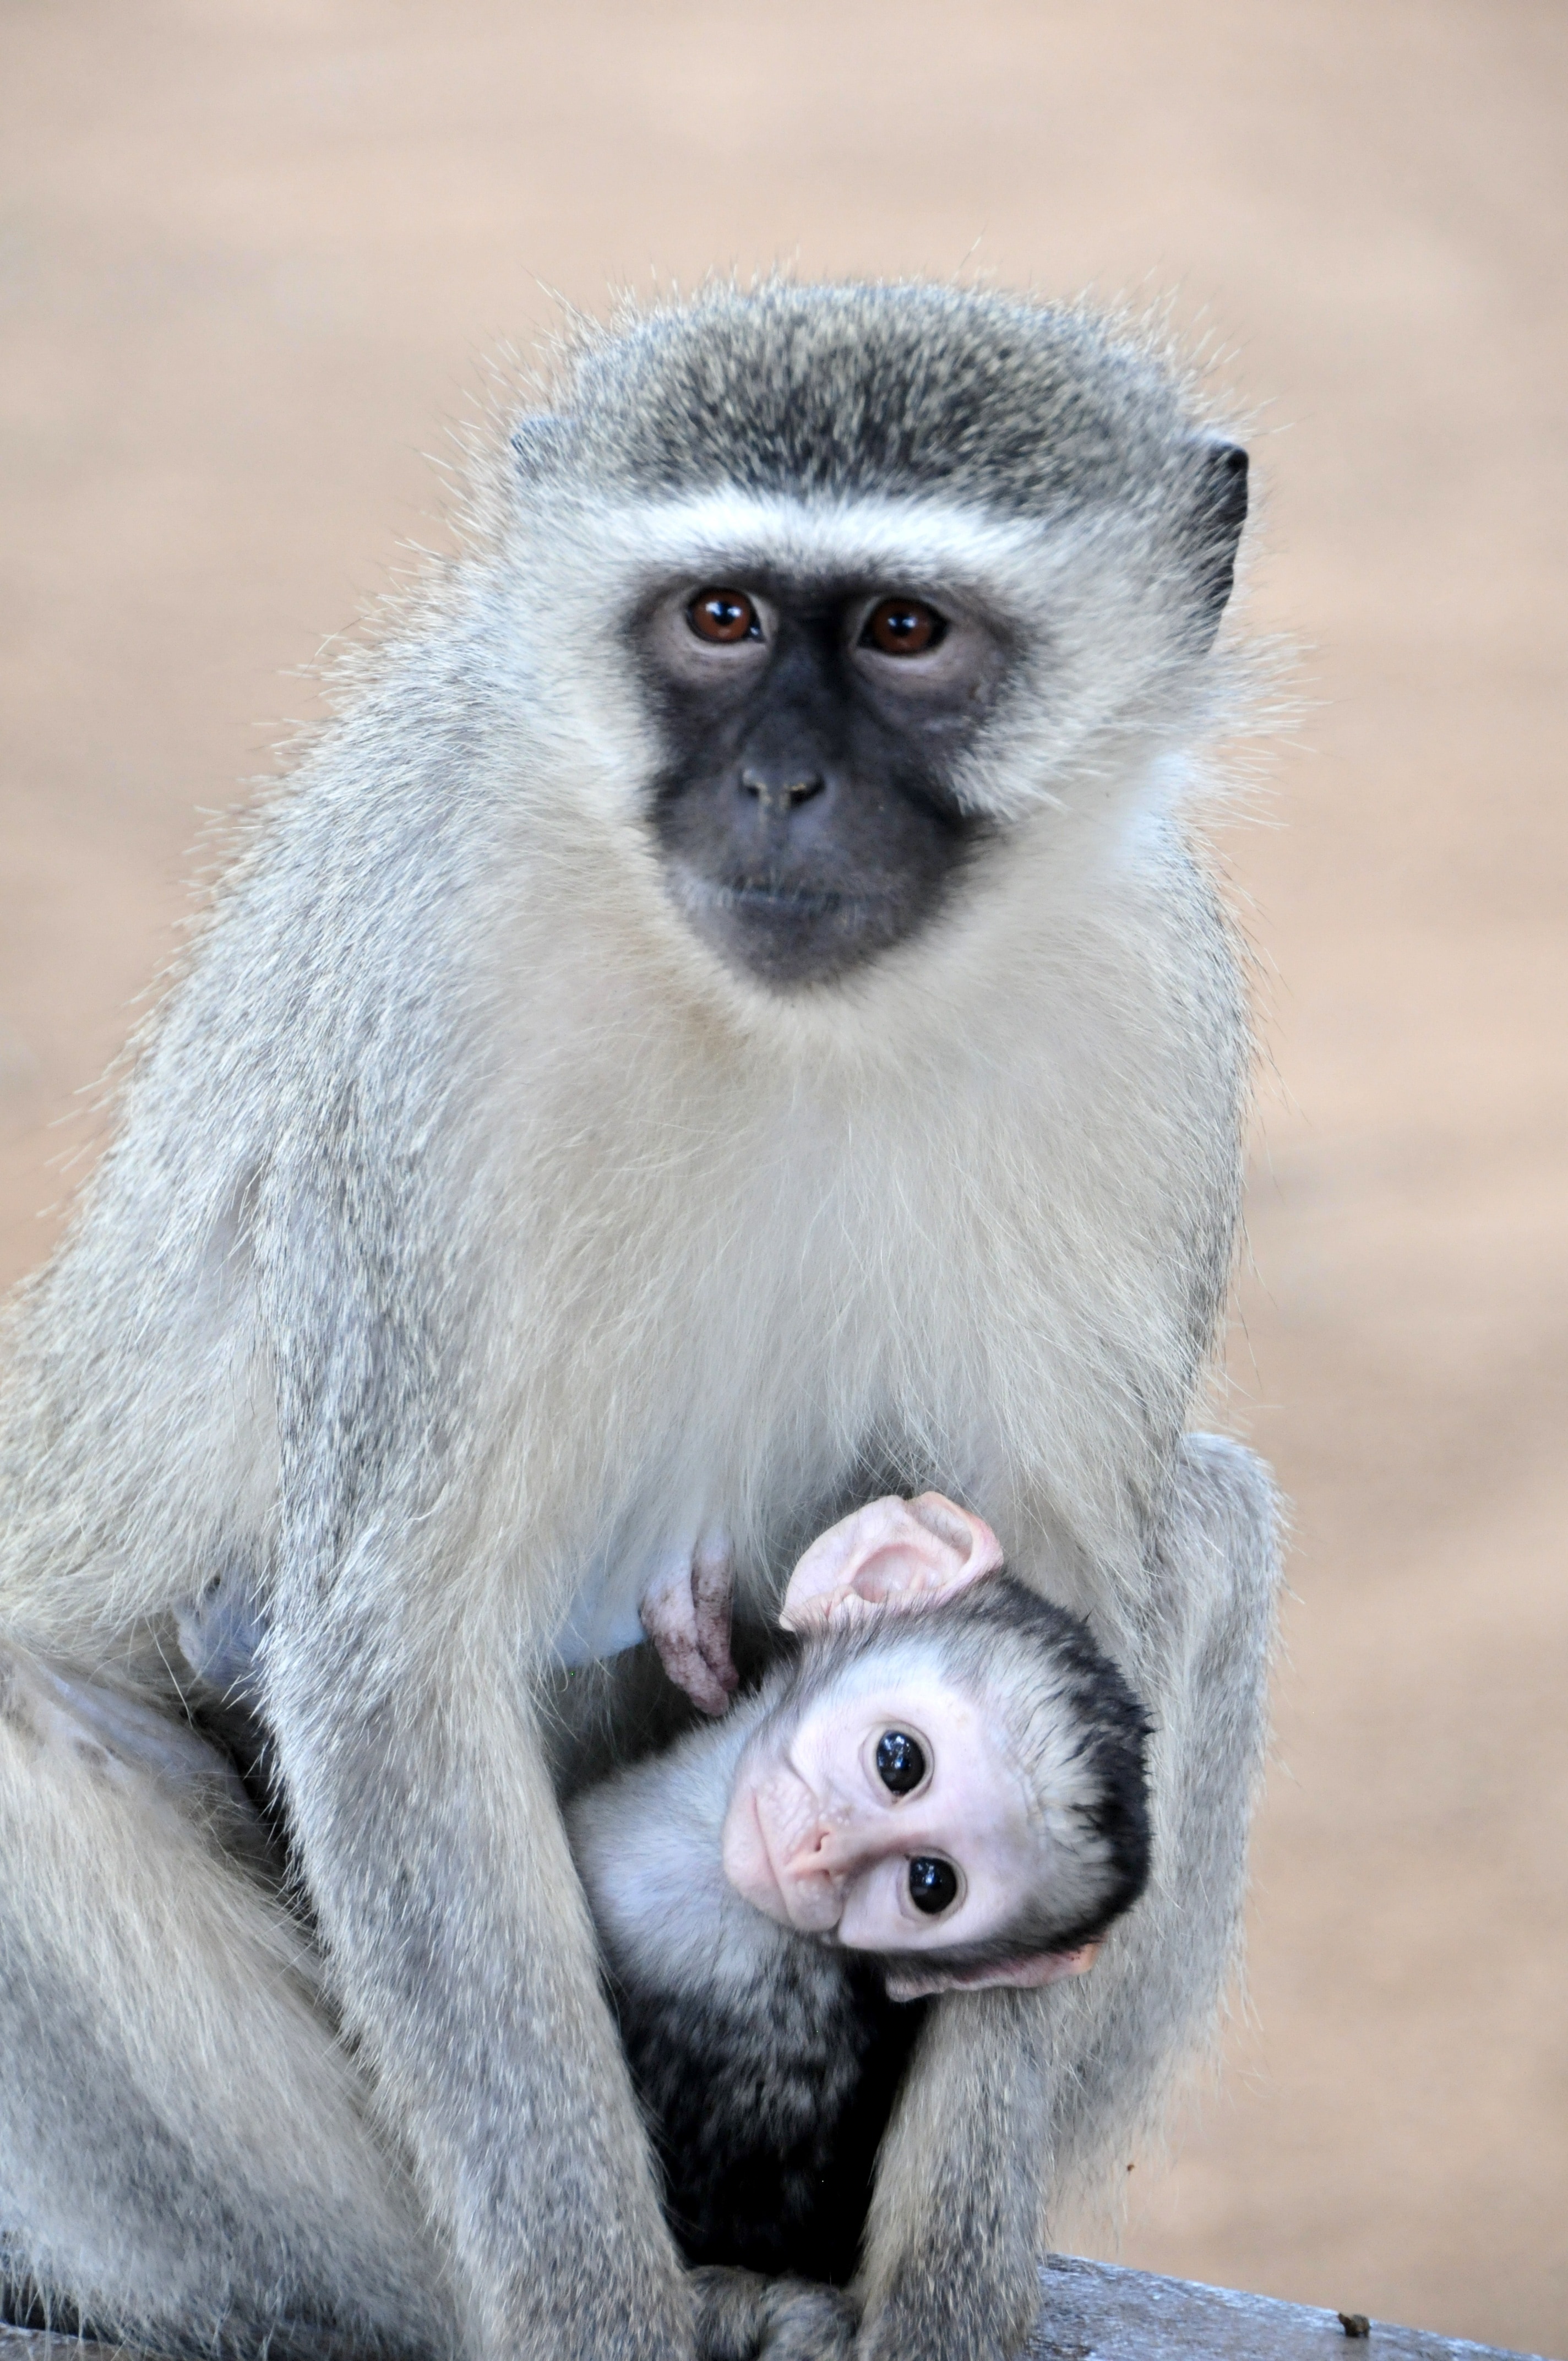 gray and white monkey and baby monkey